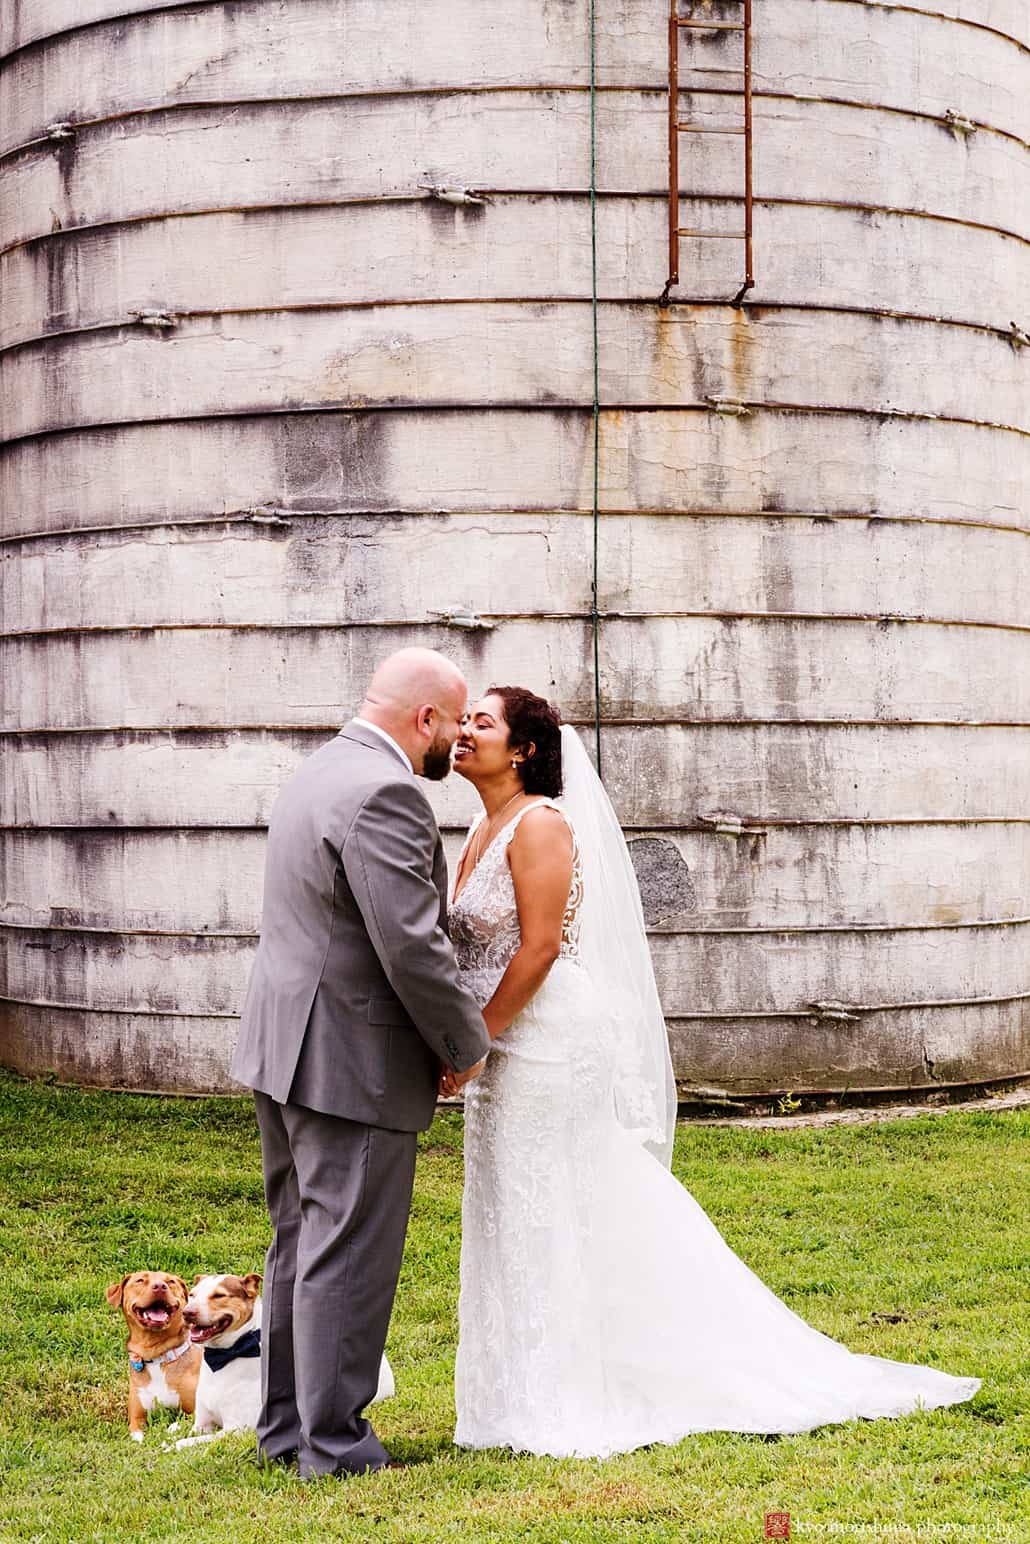 NJ farm wedding venues: portrait of the bride and groom next to the grain silo at Glenmoore Farm in Hopewell NJ, Emily’s Pennington, Adam Oded, A-1 Limo, Mary Bradley Events, Grevillea Weddings and Events, Kyo Morishima Photography, Princeton dogs portraits